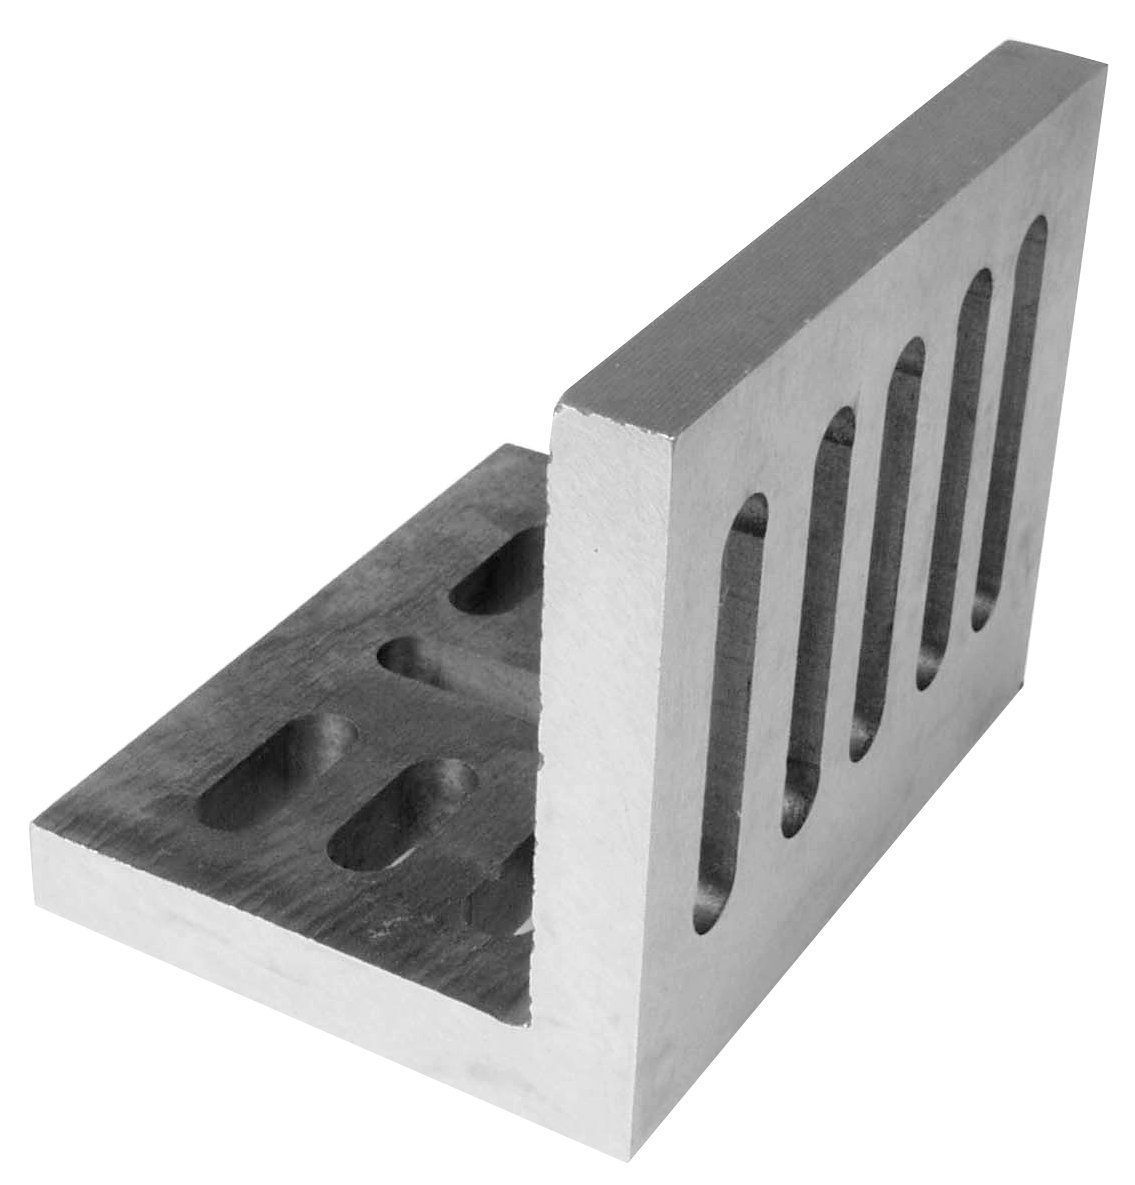 12 X 9 X 8 OPEN END SLOTTED ANGLE PLATE (3402-0212)